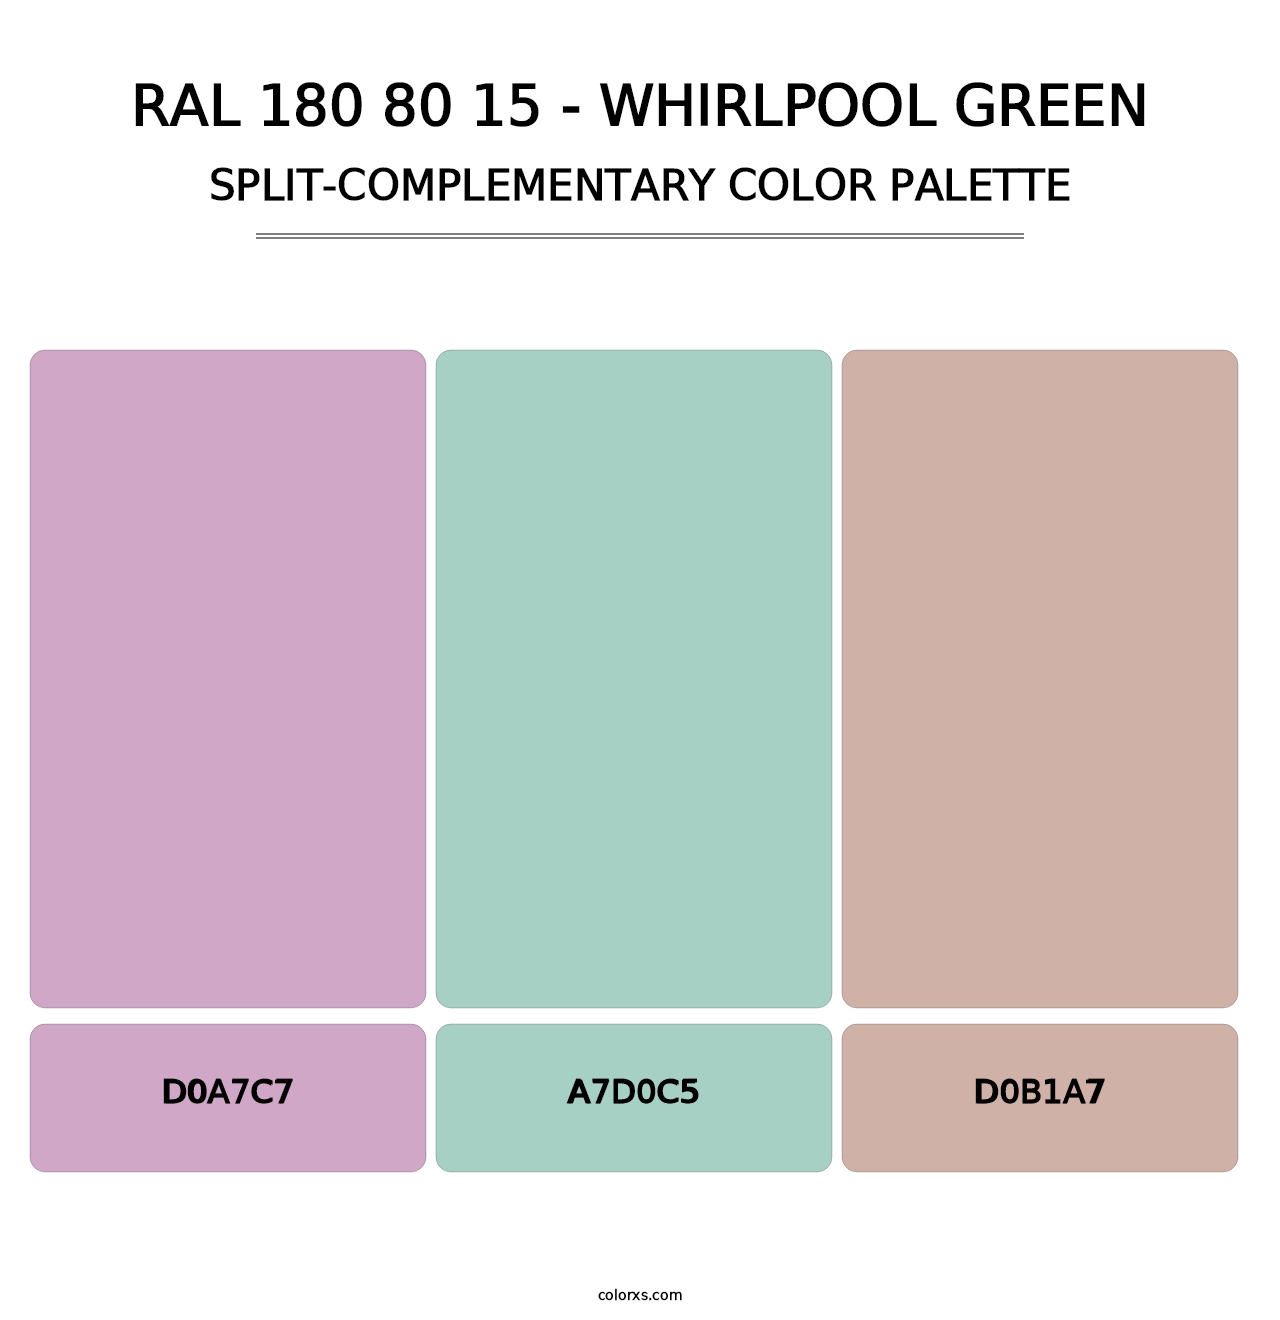 RAL 180 80 15 - Whirlpool Green - Split-Complementary Color Palette